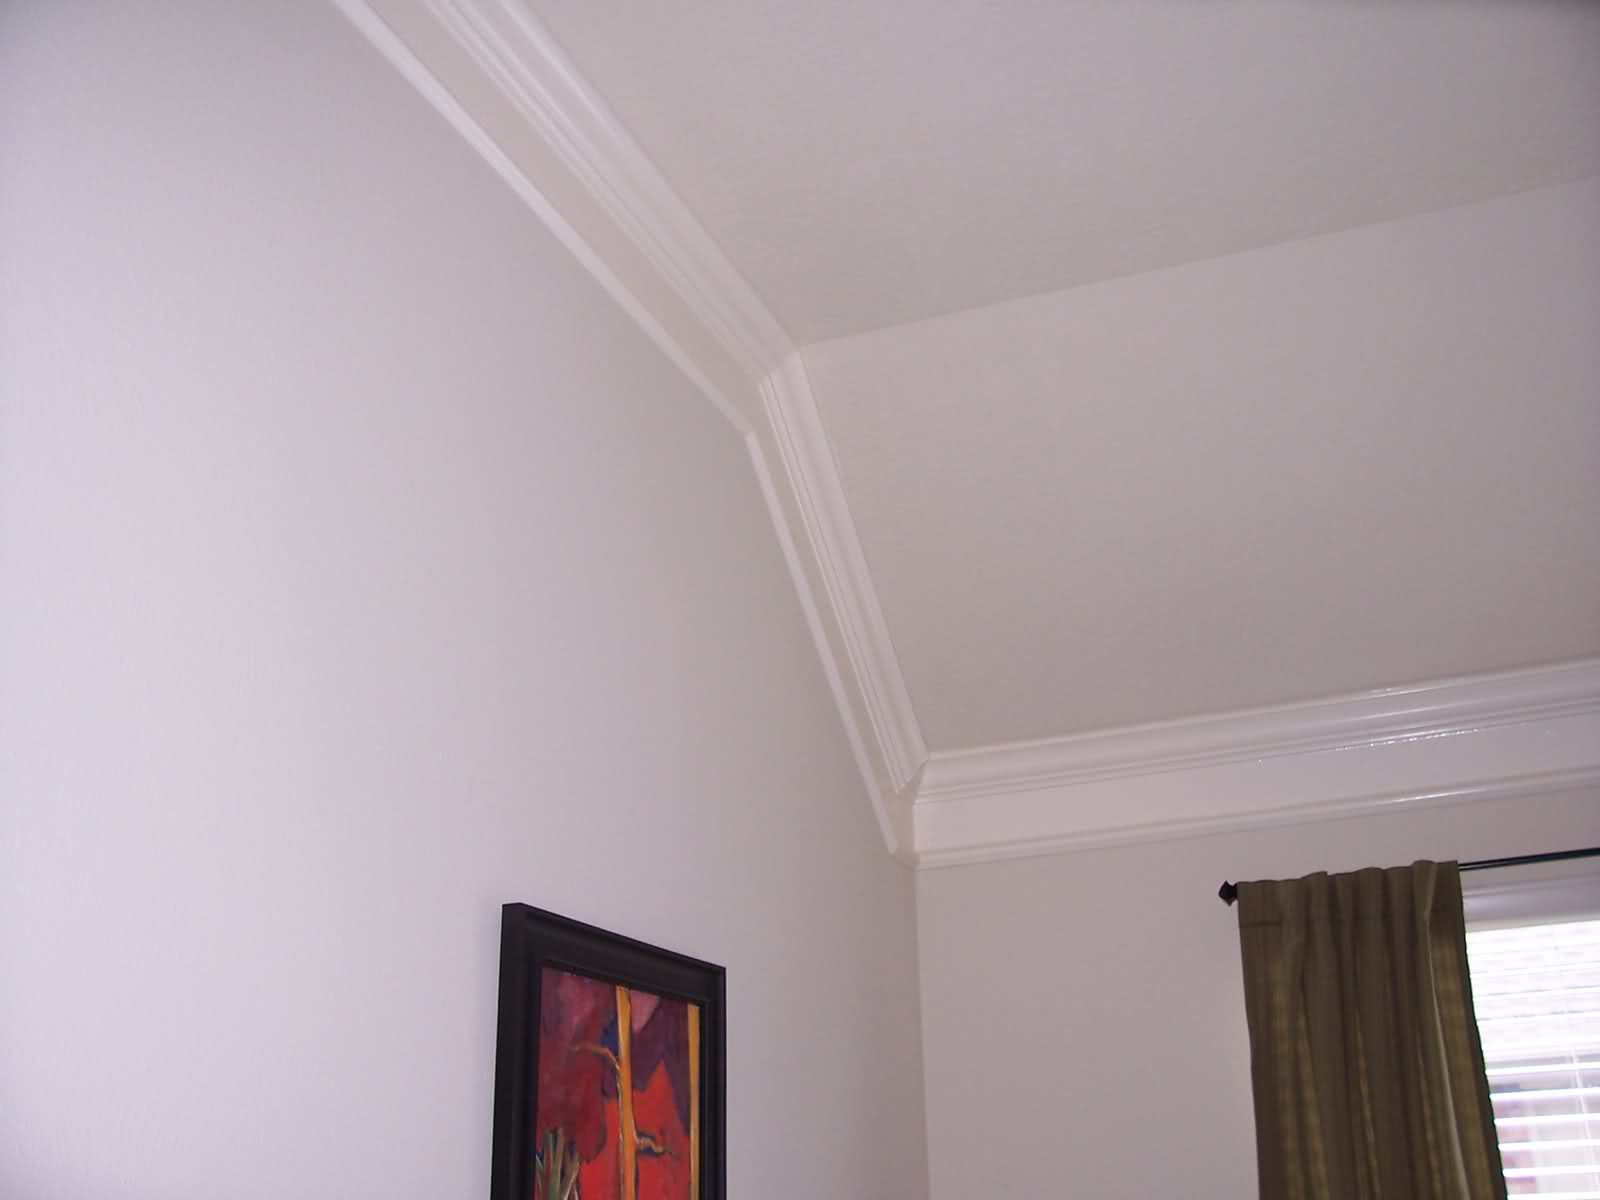 Free Download Crown Molding On Vaulted Ceilings Hd Walls Find